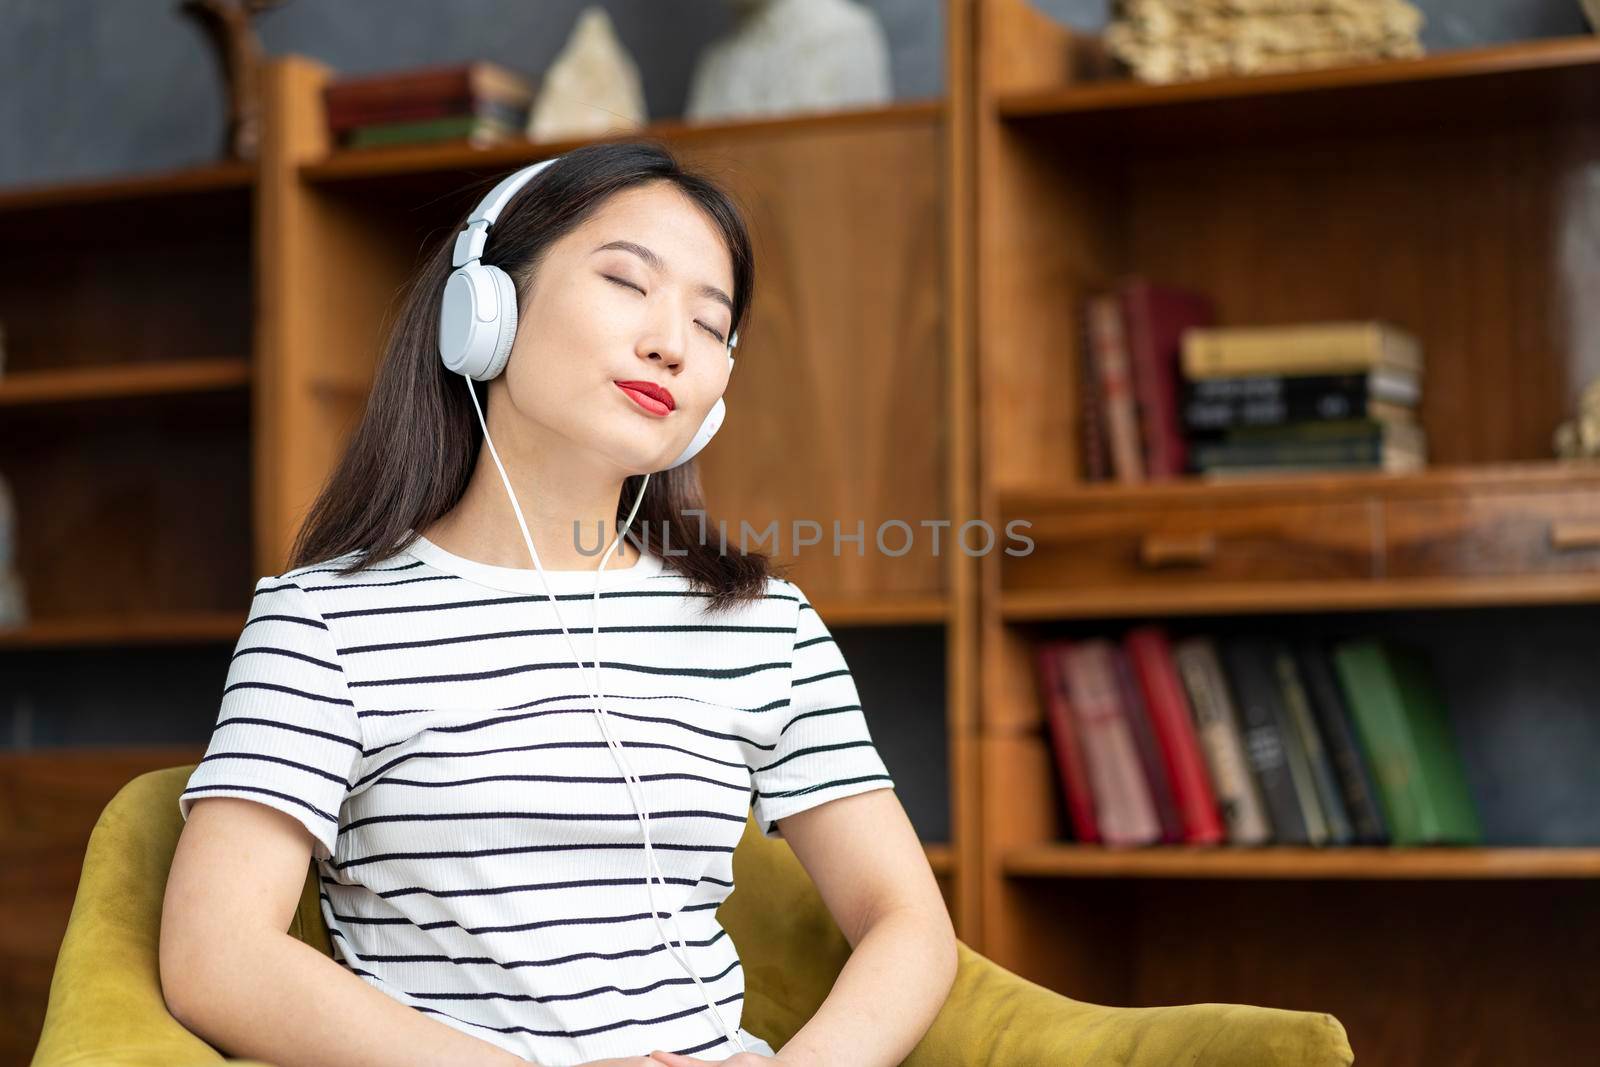 Young beautiful Asian girl listening to music with headphones sitting in chair. Woman with closed eyes. Morning routine and contemplation